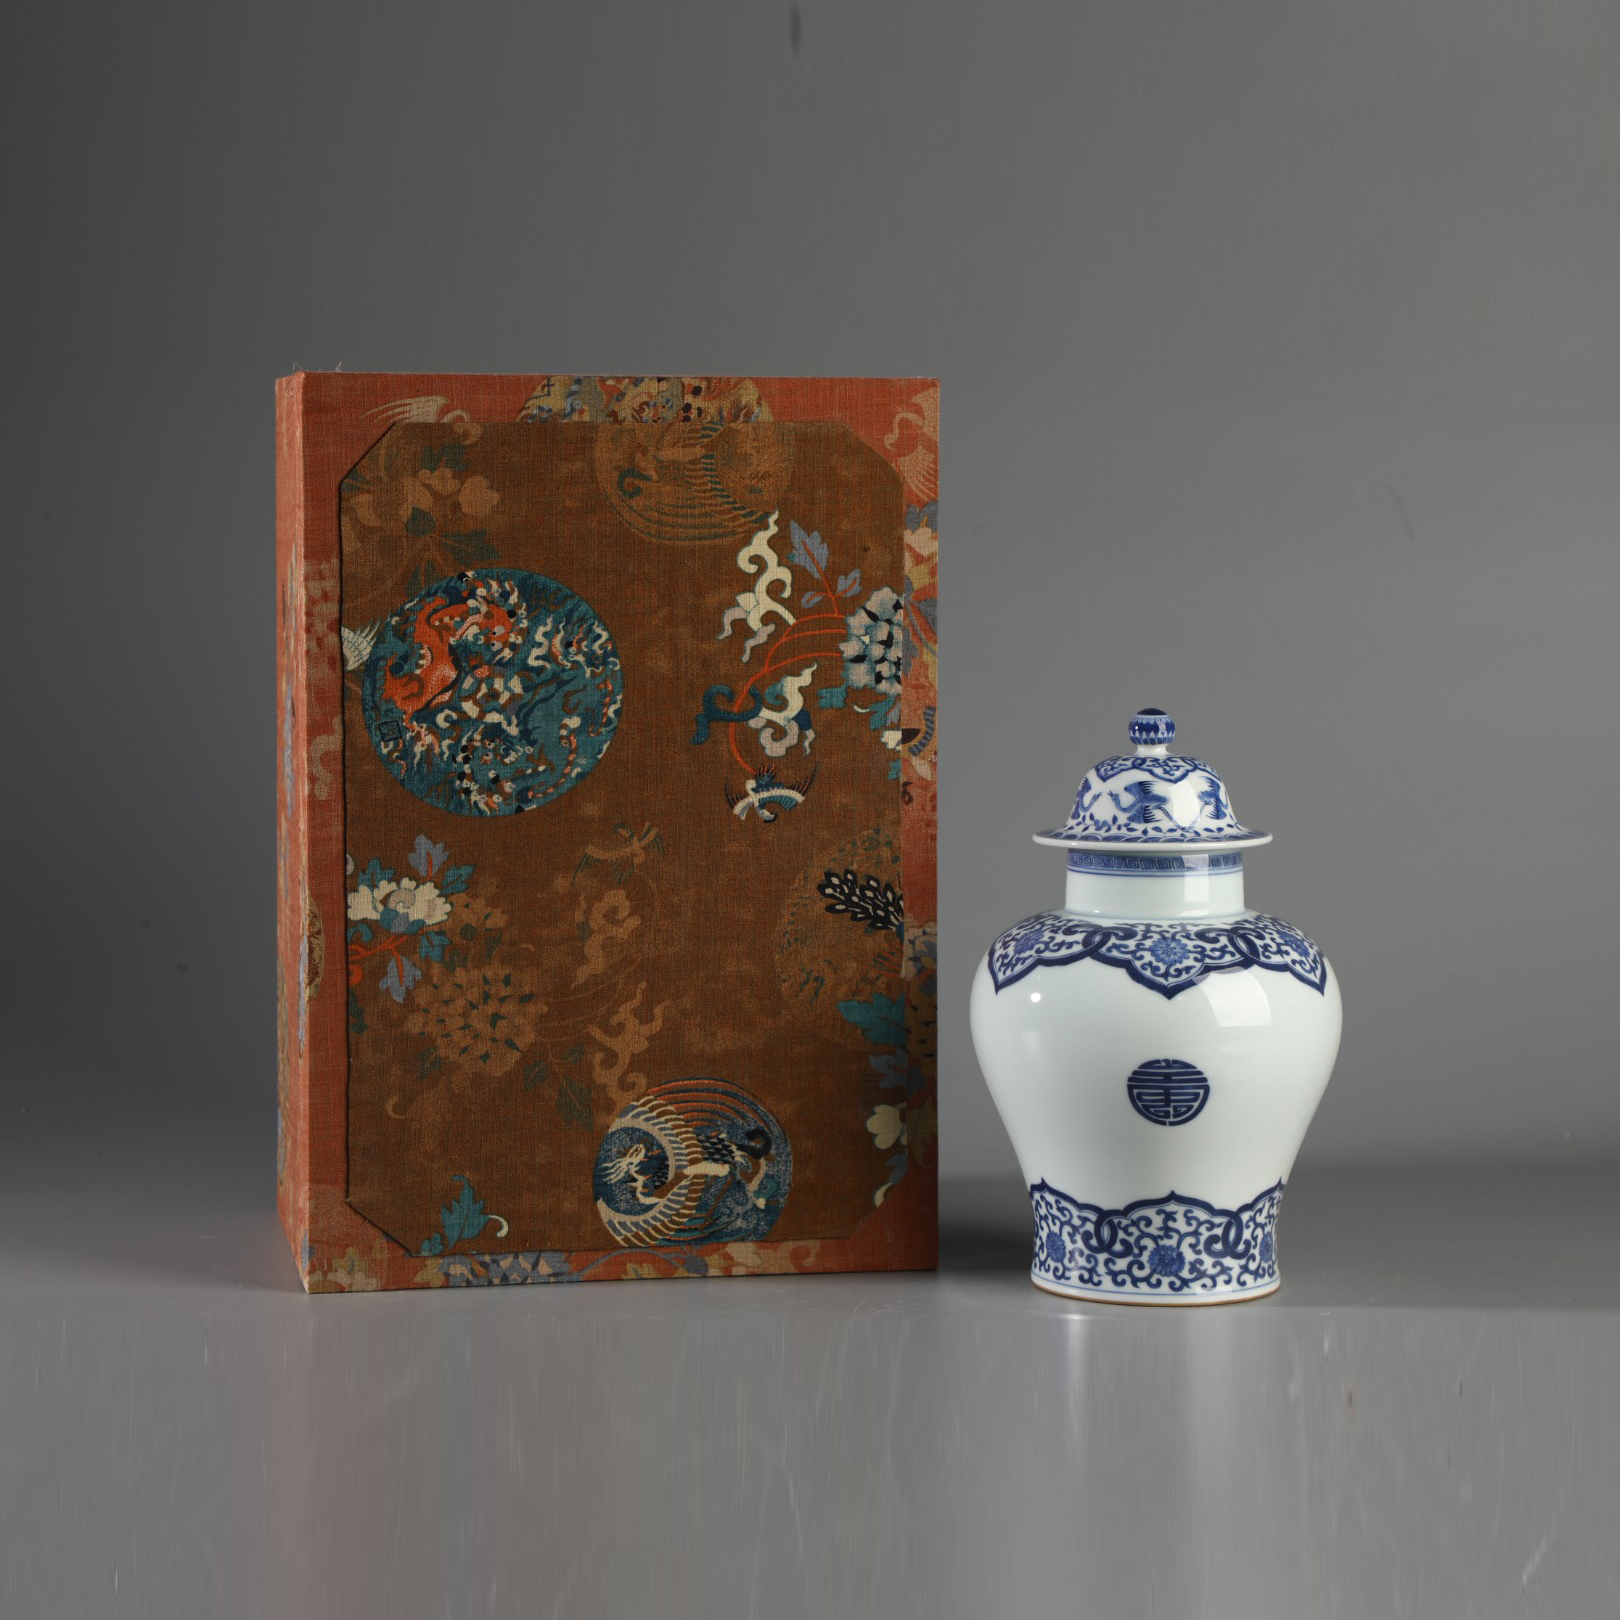 Blue and white jar made during the reign of Emperor Kangxi of the Qing Dynasty